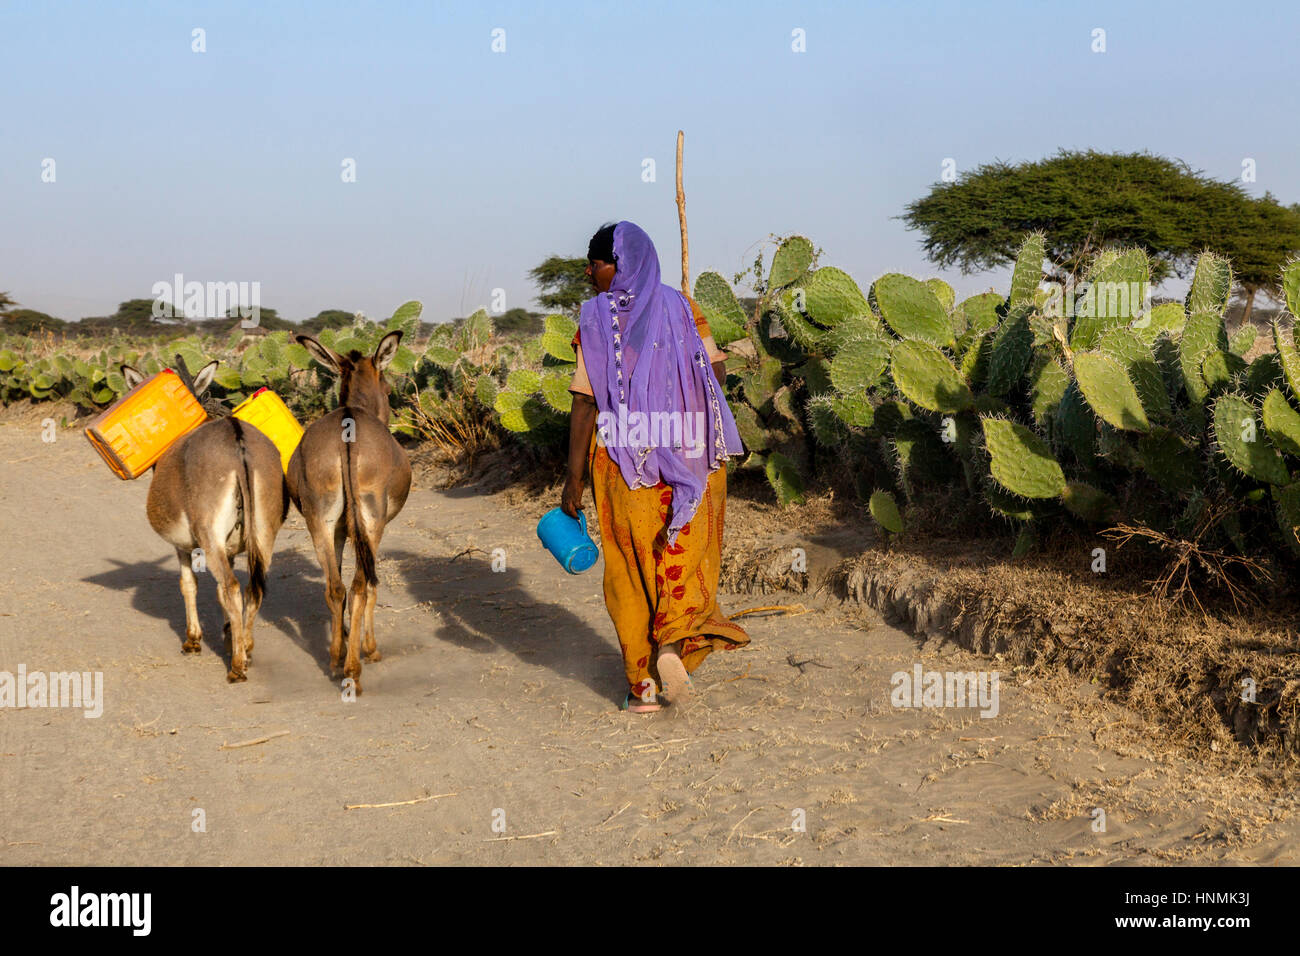 A Woman Travels Back To Her Home With Water That She Has Just Collected, Abijatta-Shalla National Park, Ethiopia Stock Photo